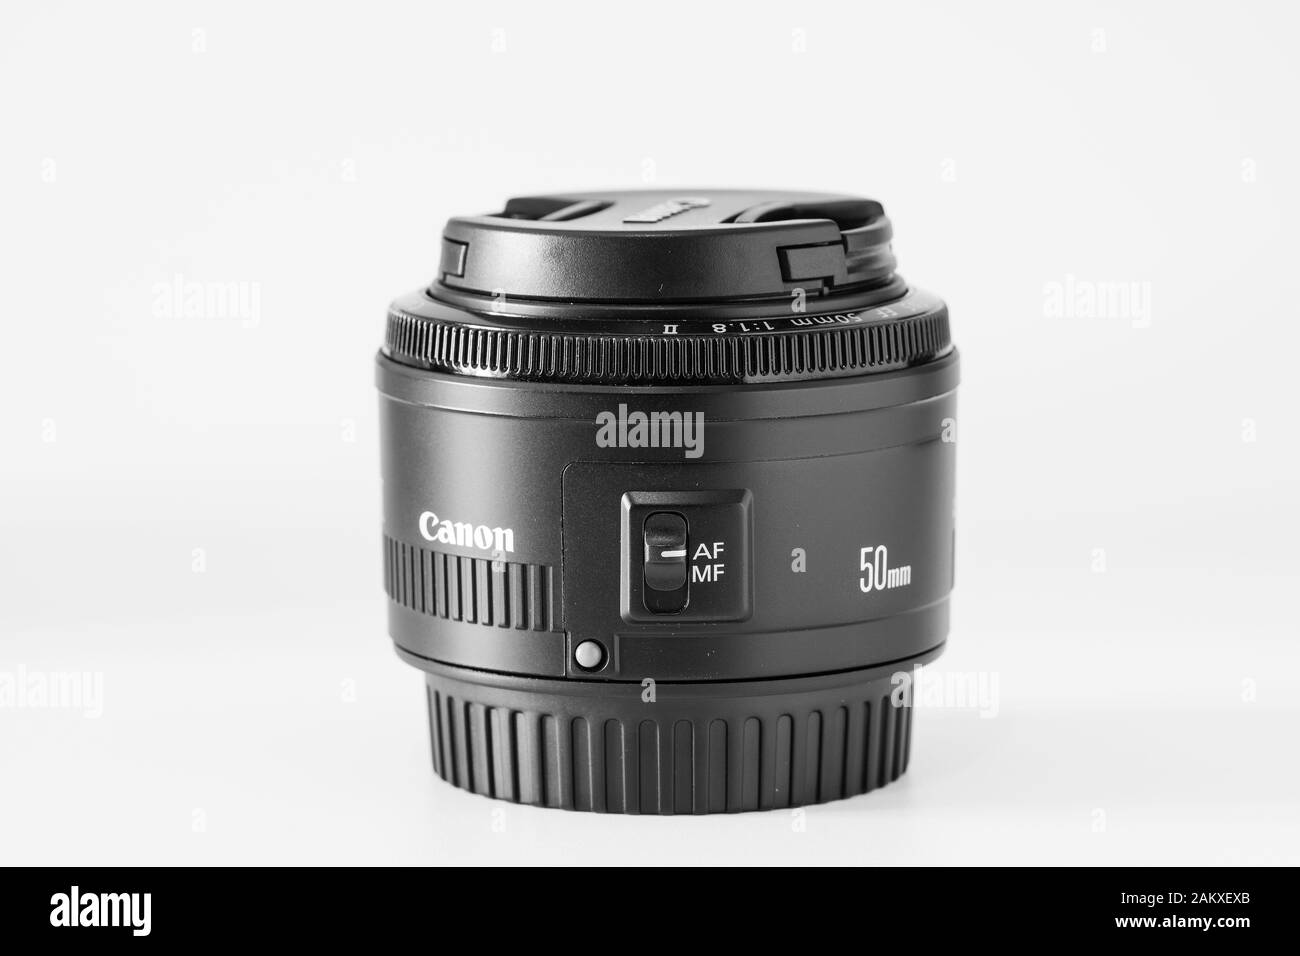 Vertical view of a Canon 50mm f1.8 lens, monochrome image in black and white. Stock Photo